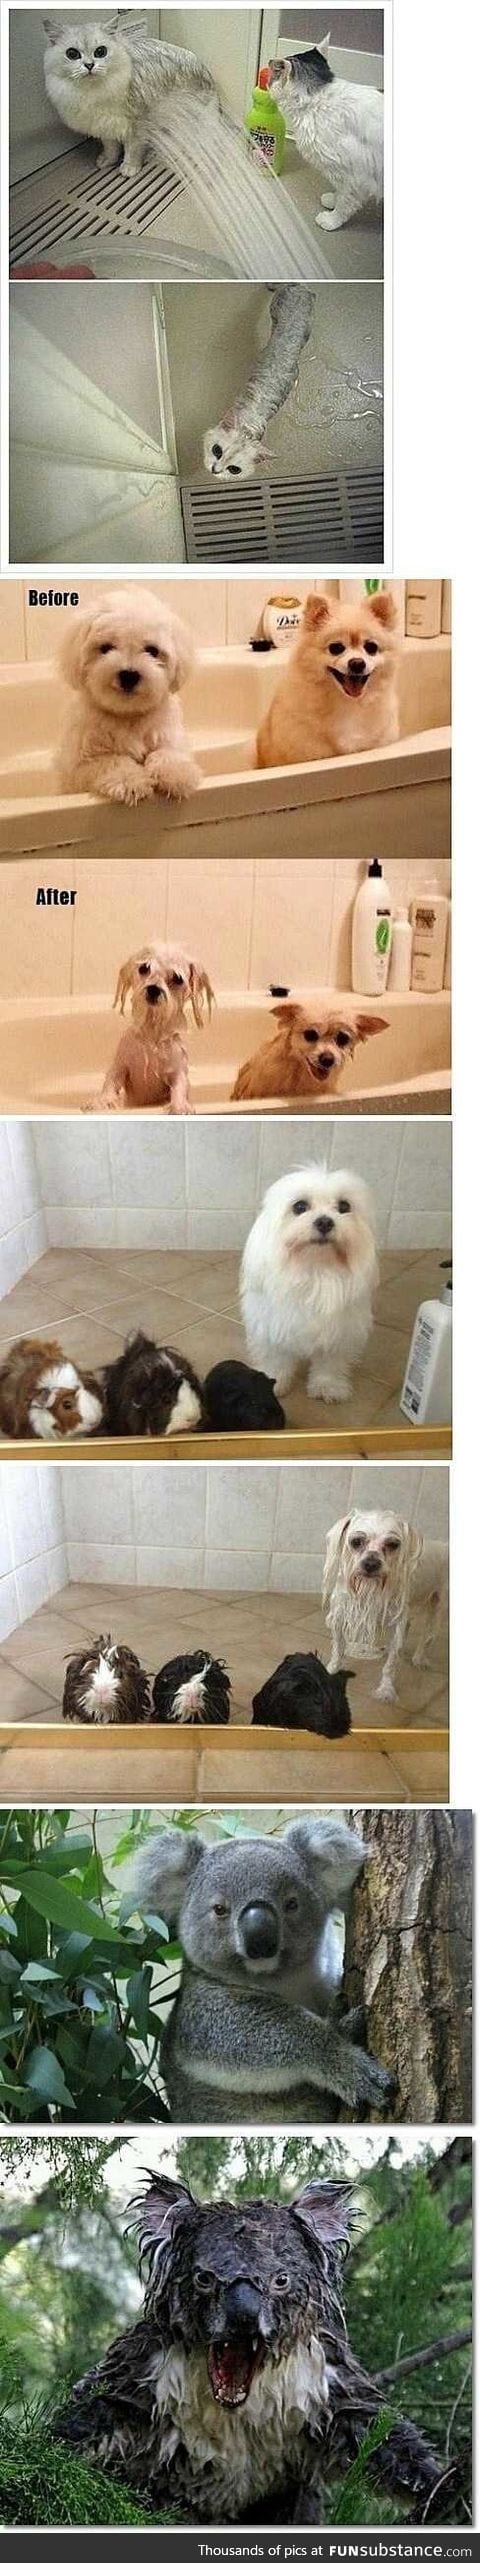 Before & after. Wet and dry animals